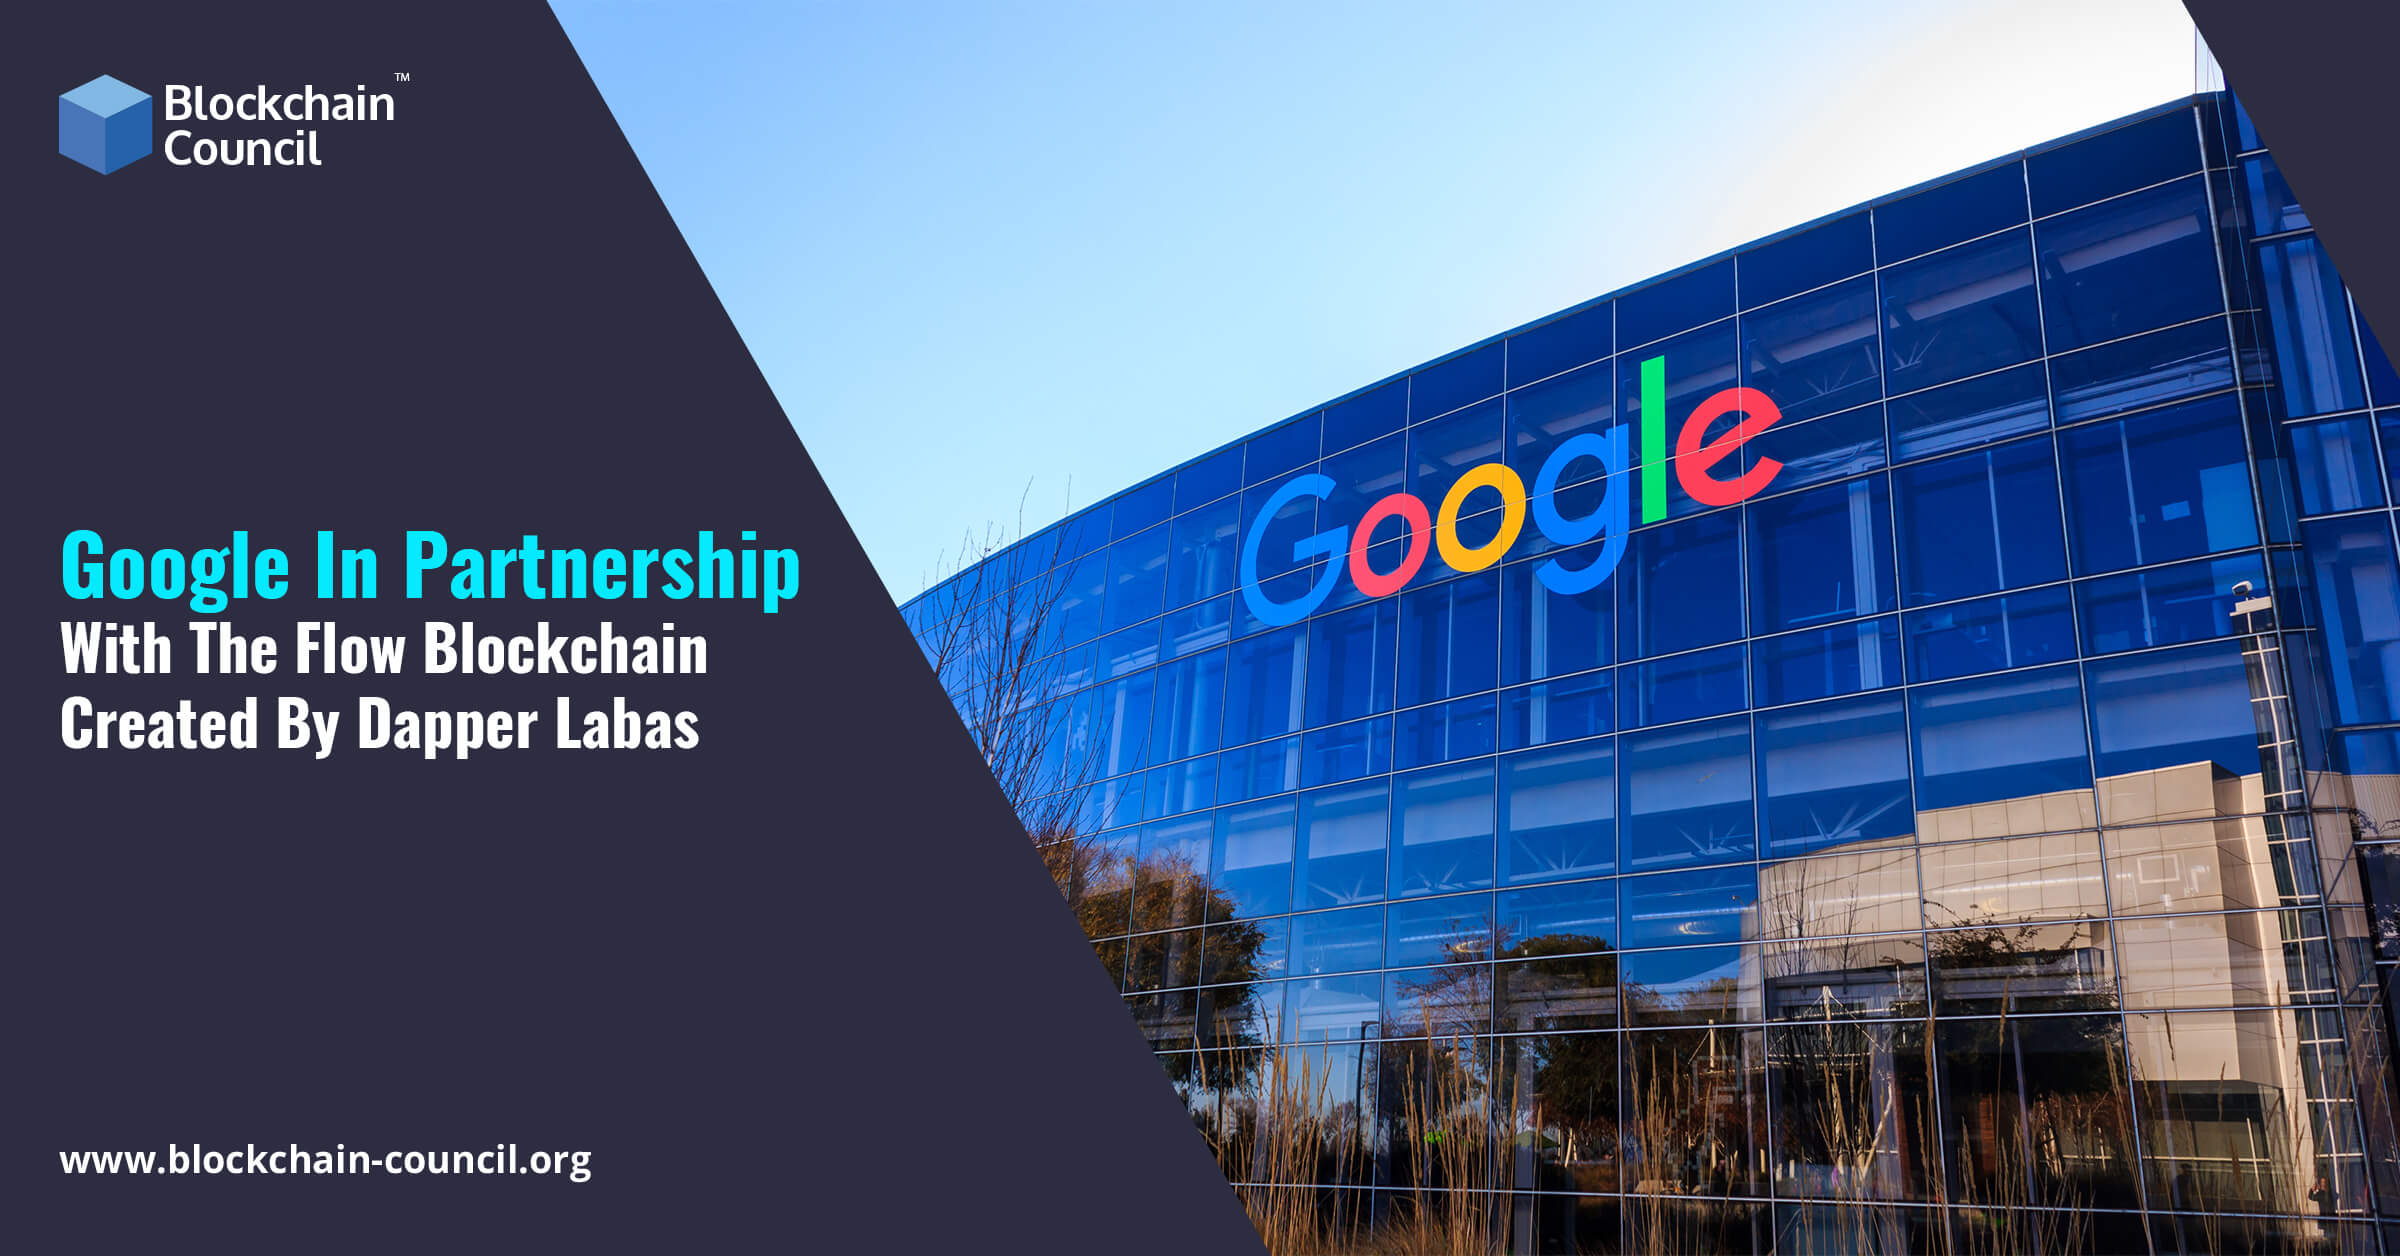 Google In Partnership With The Flow Blockchain Created By Dapper Labs